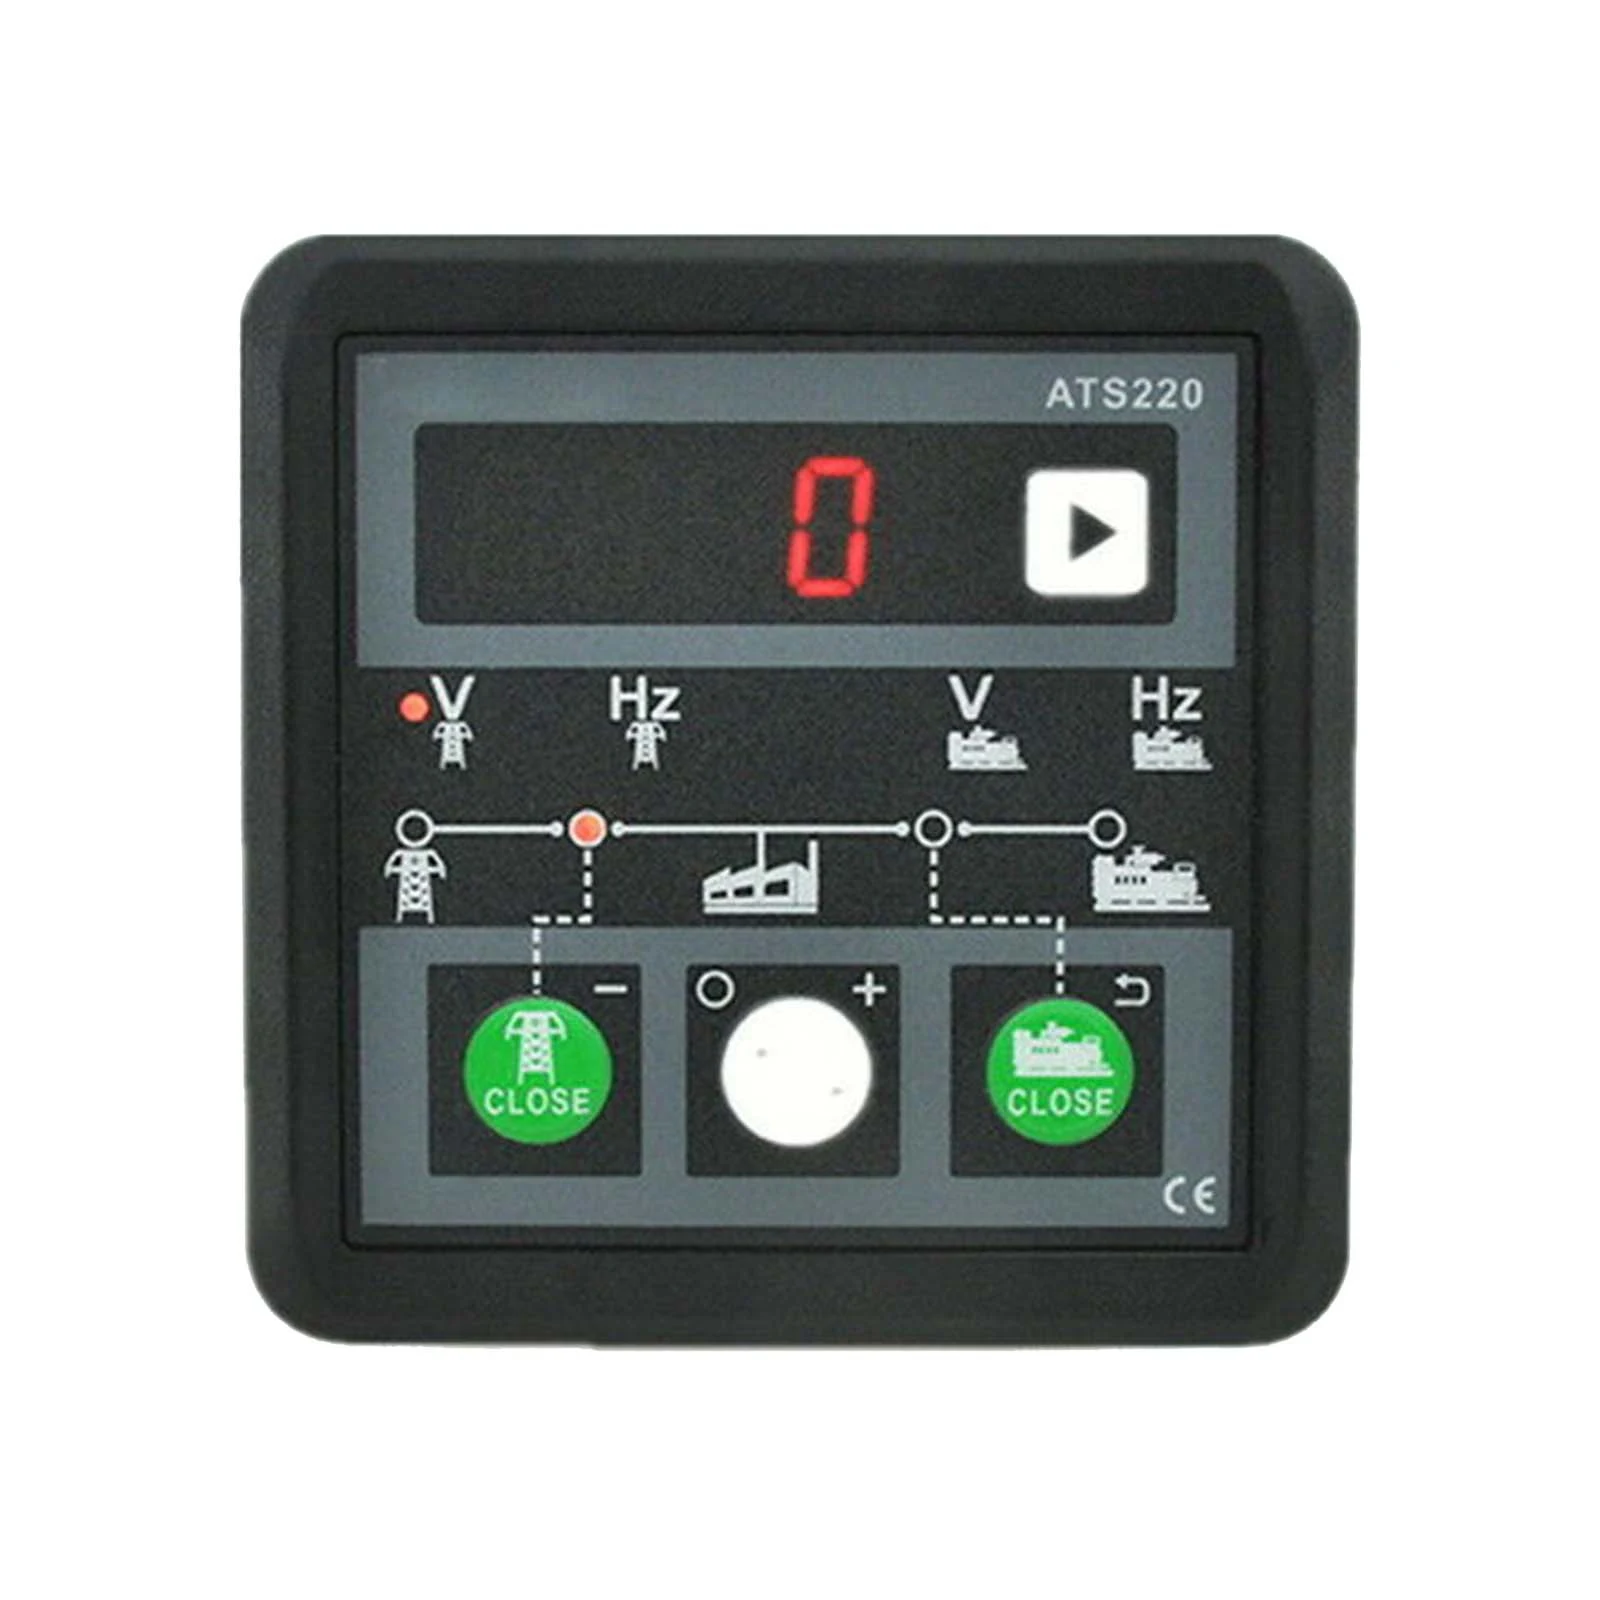 

ATS220 DC 8-36V Mains/Generation ATS Controller Automatic Transfer Switch Controller